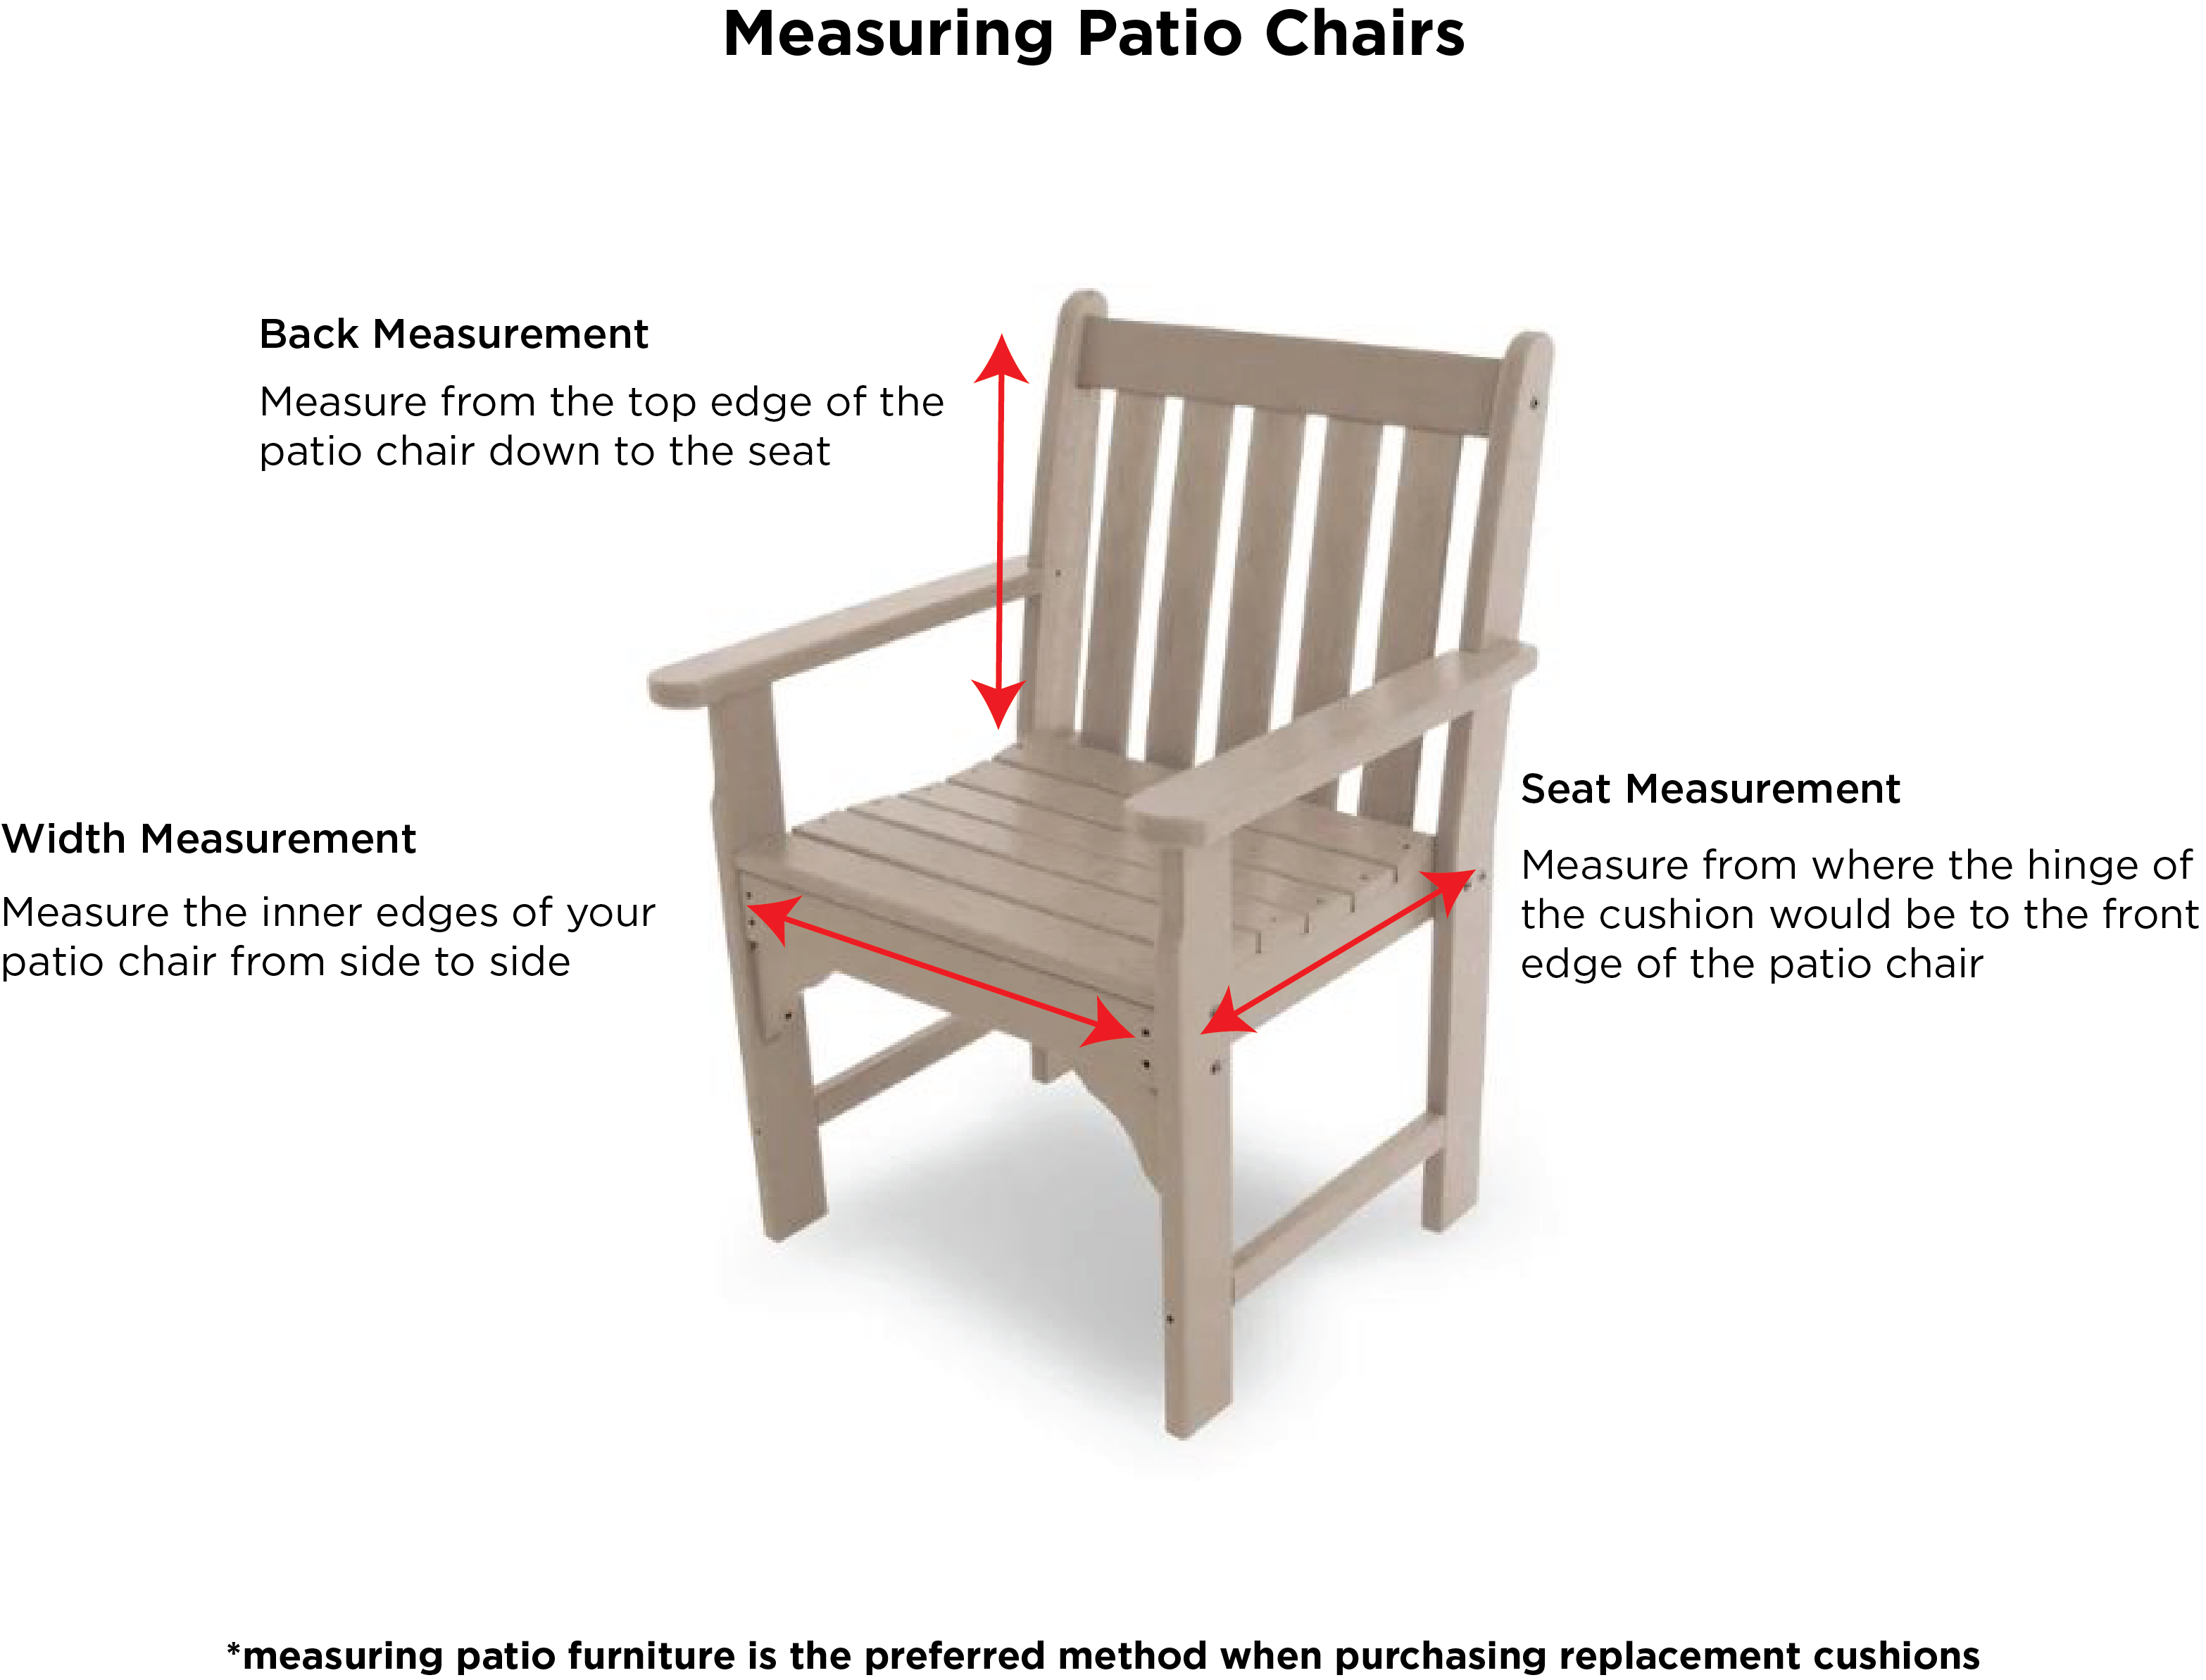 How to Measure Patio Cushions